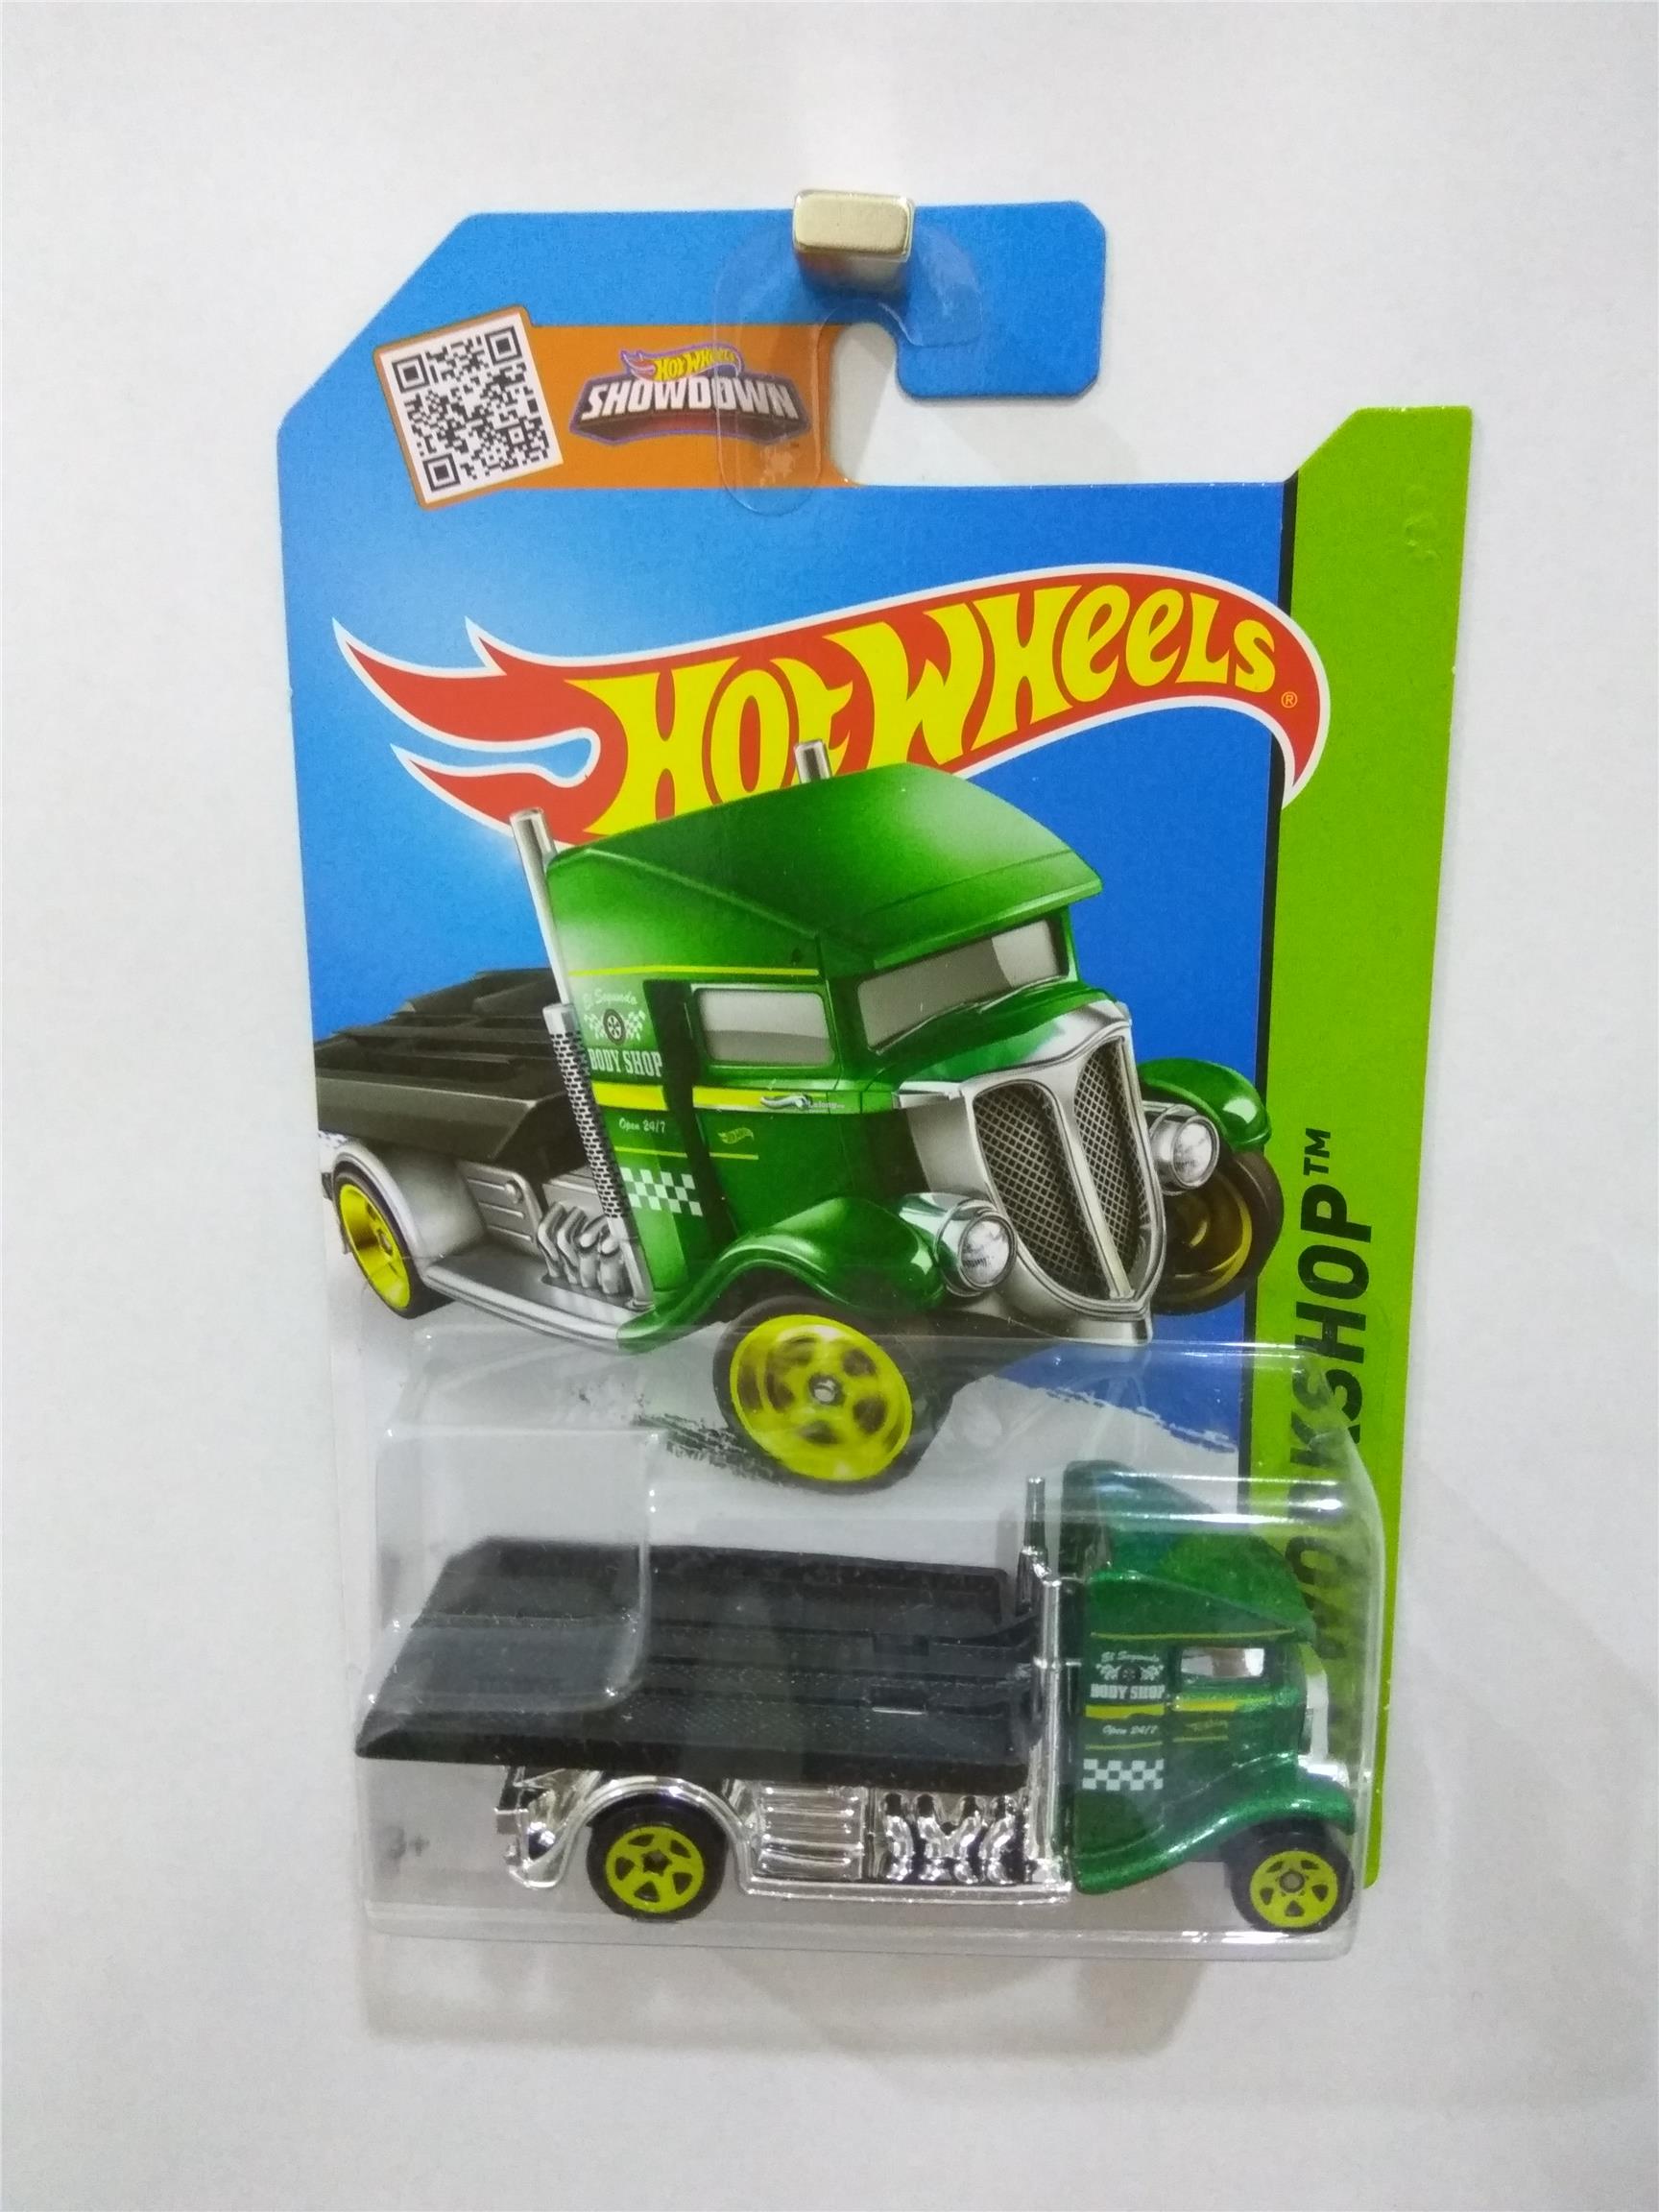 Fast bed. Hot Wheels fast Bed Hauler. Fast Bed Hauler модель. Hot Wheels fast-Bed Hauler tele, Taos Turquoise. Hw Haulers.